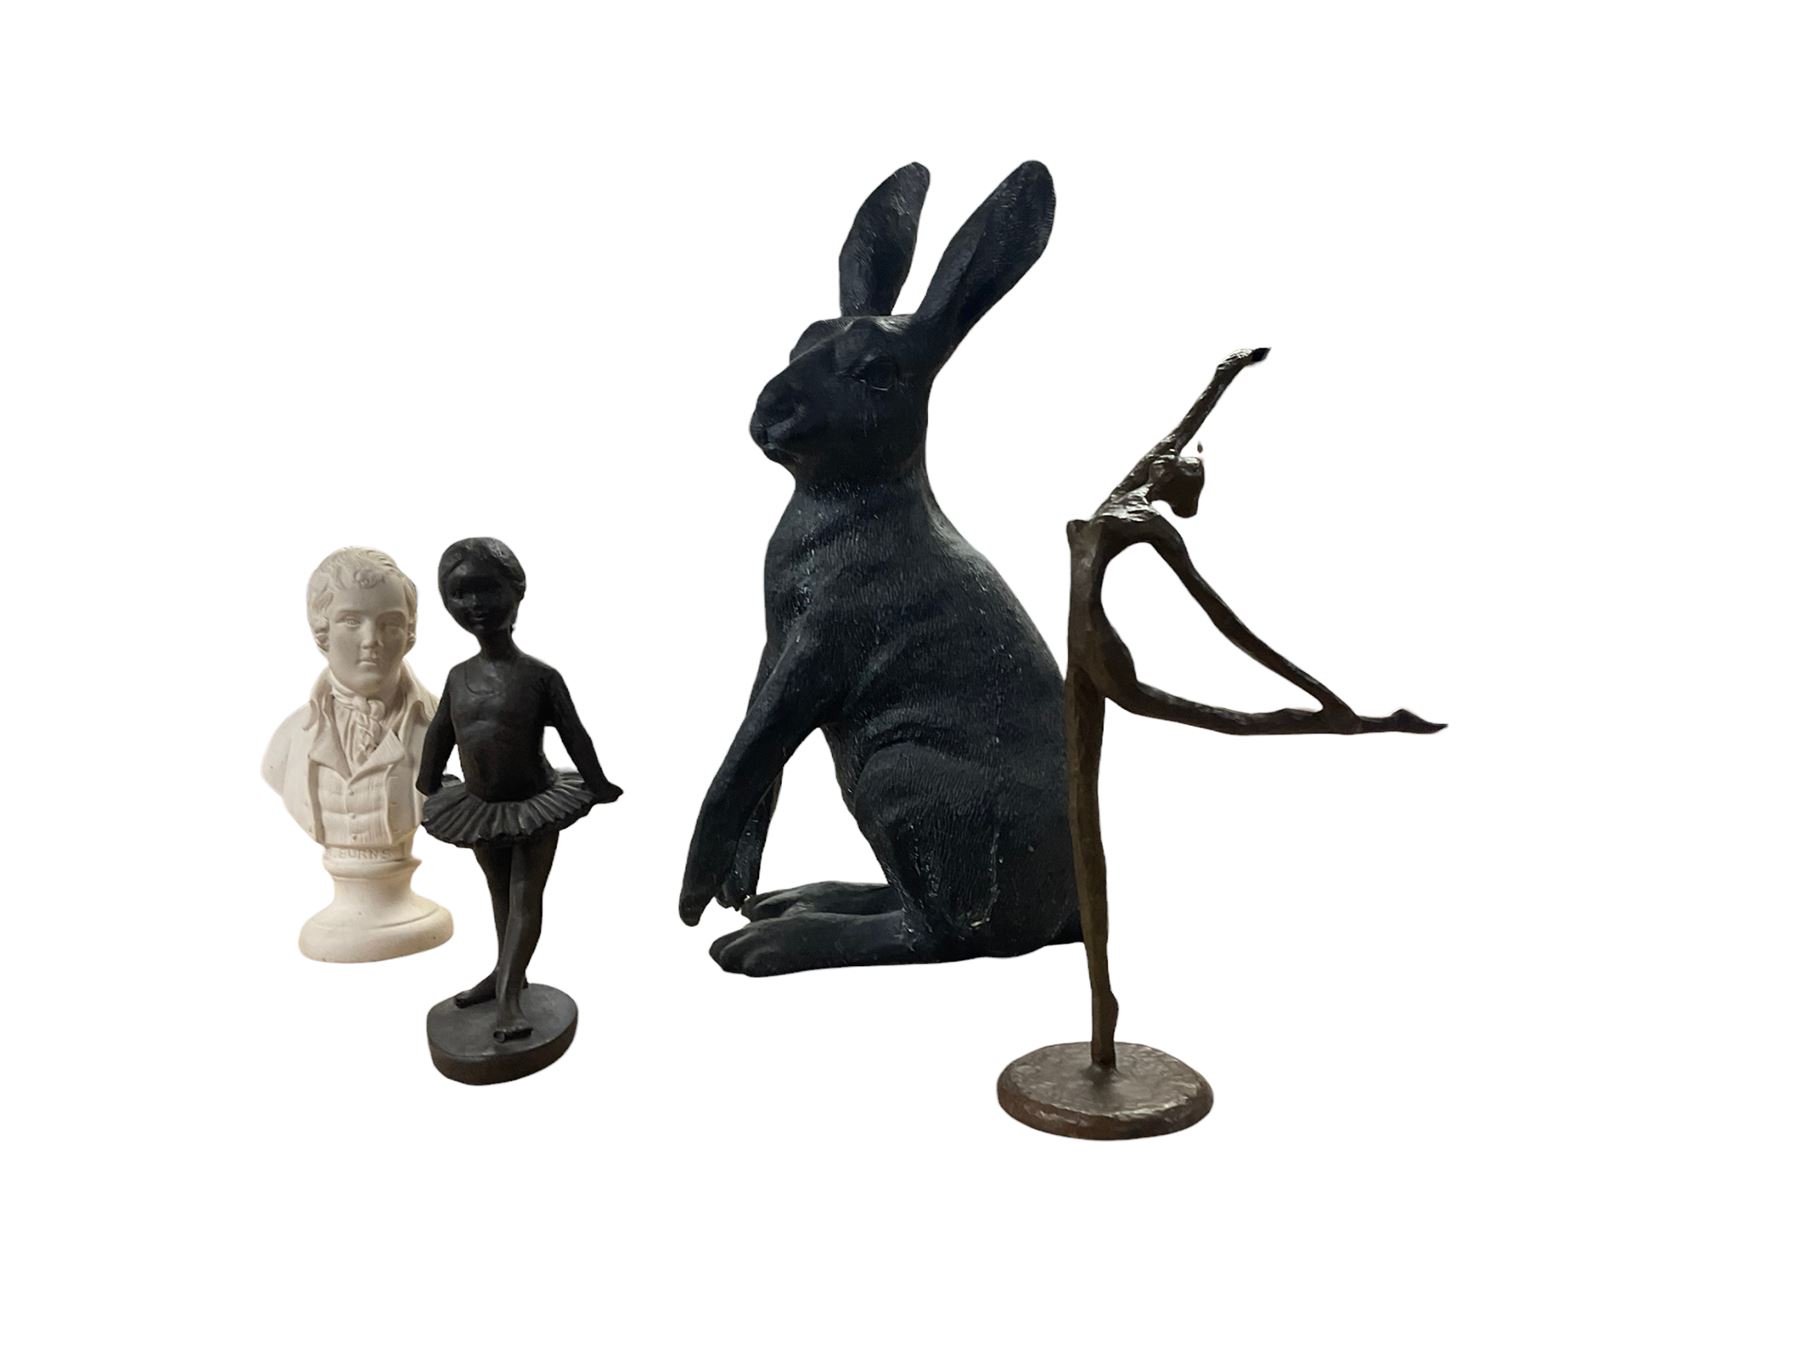 Large composite hare figures